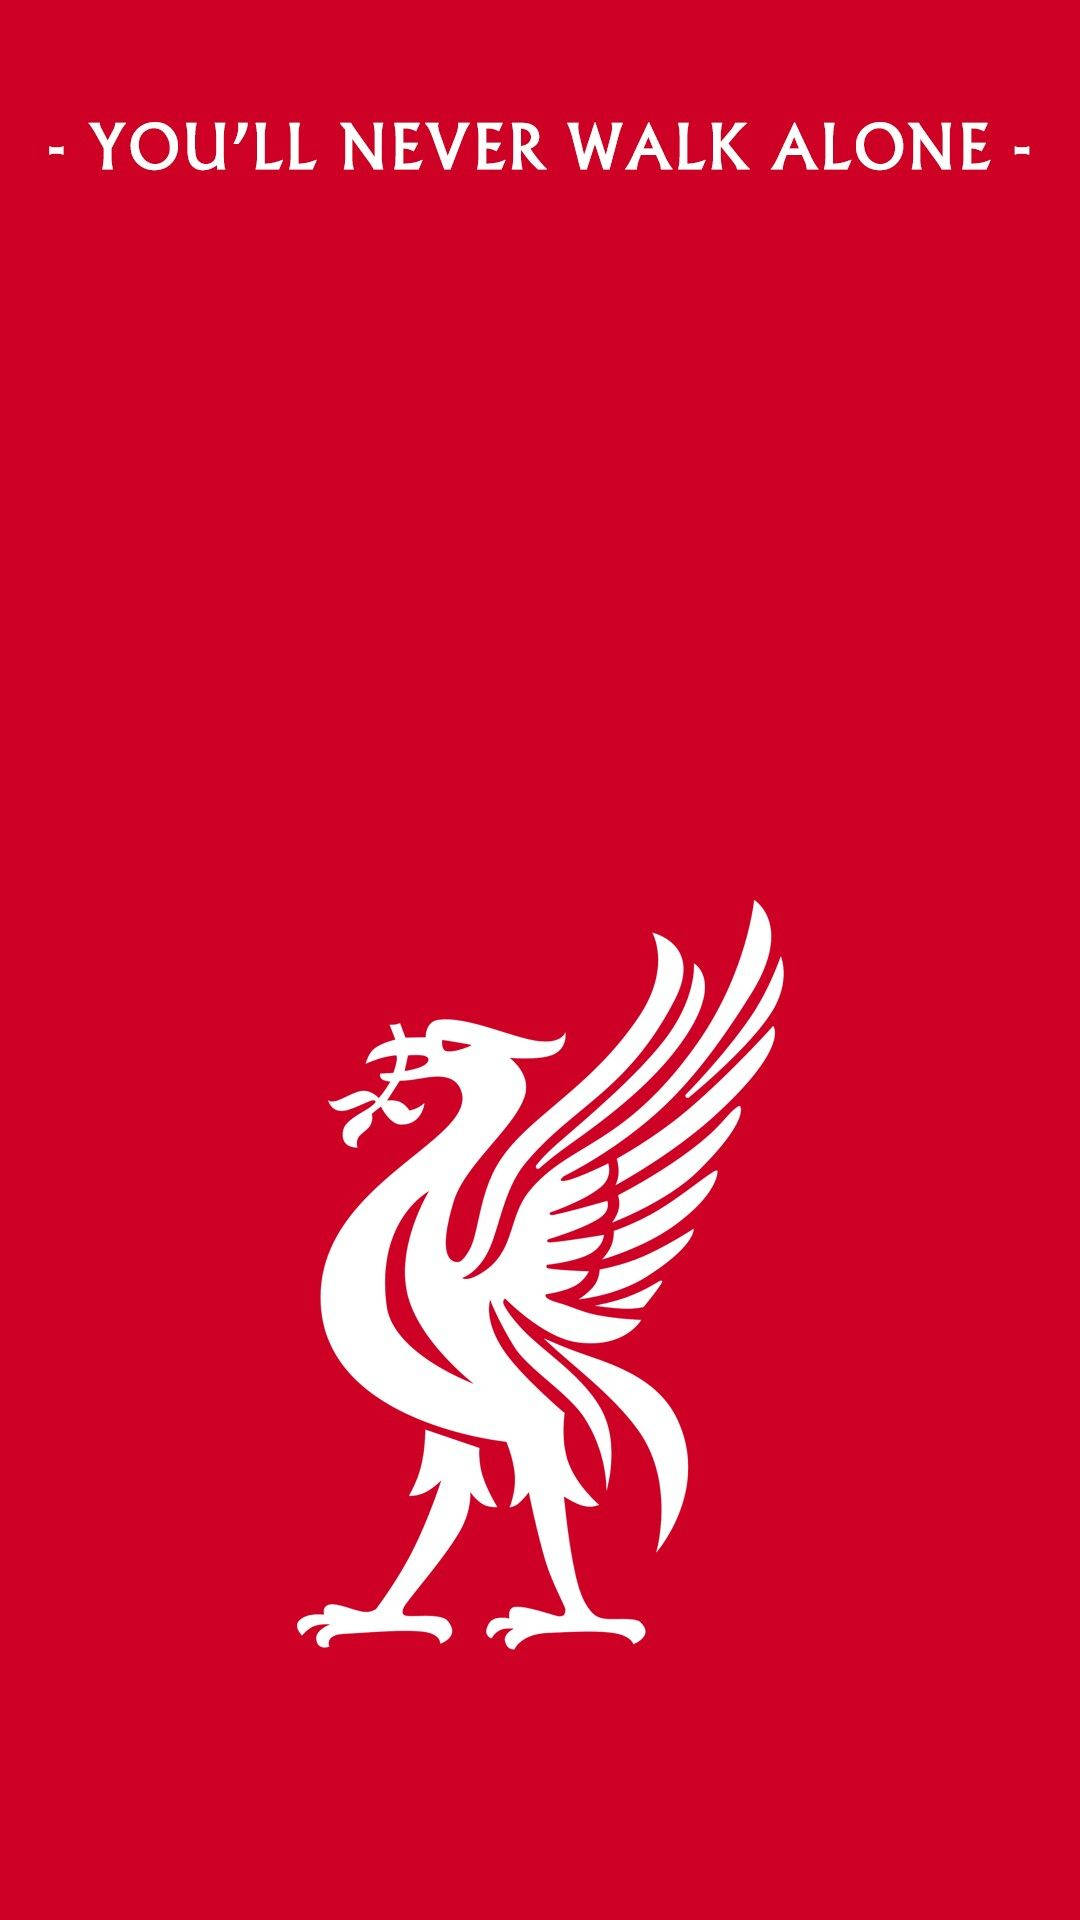 You'll Never Walk Alone Liverpool Fc Background